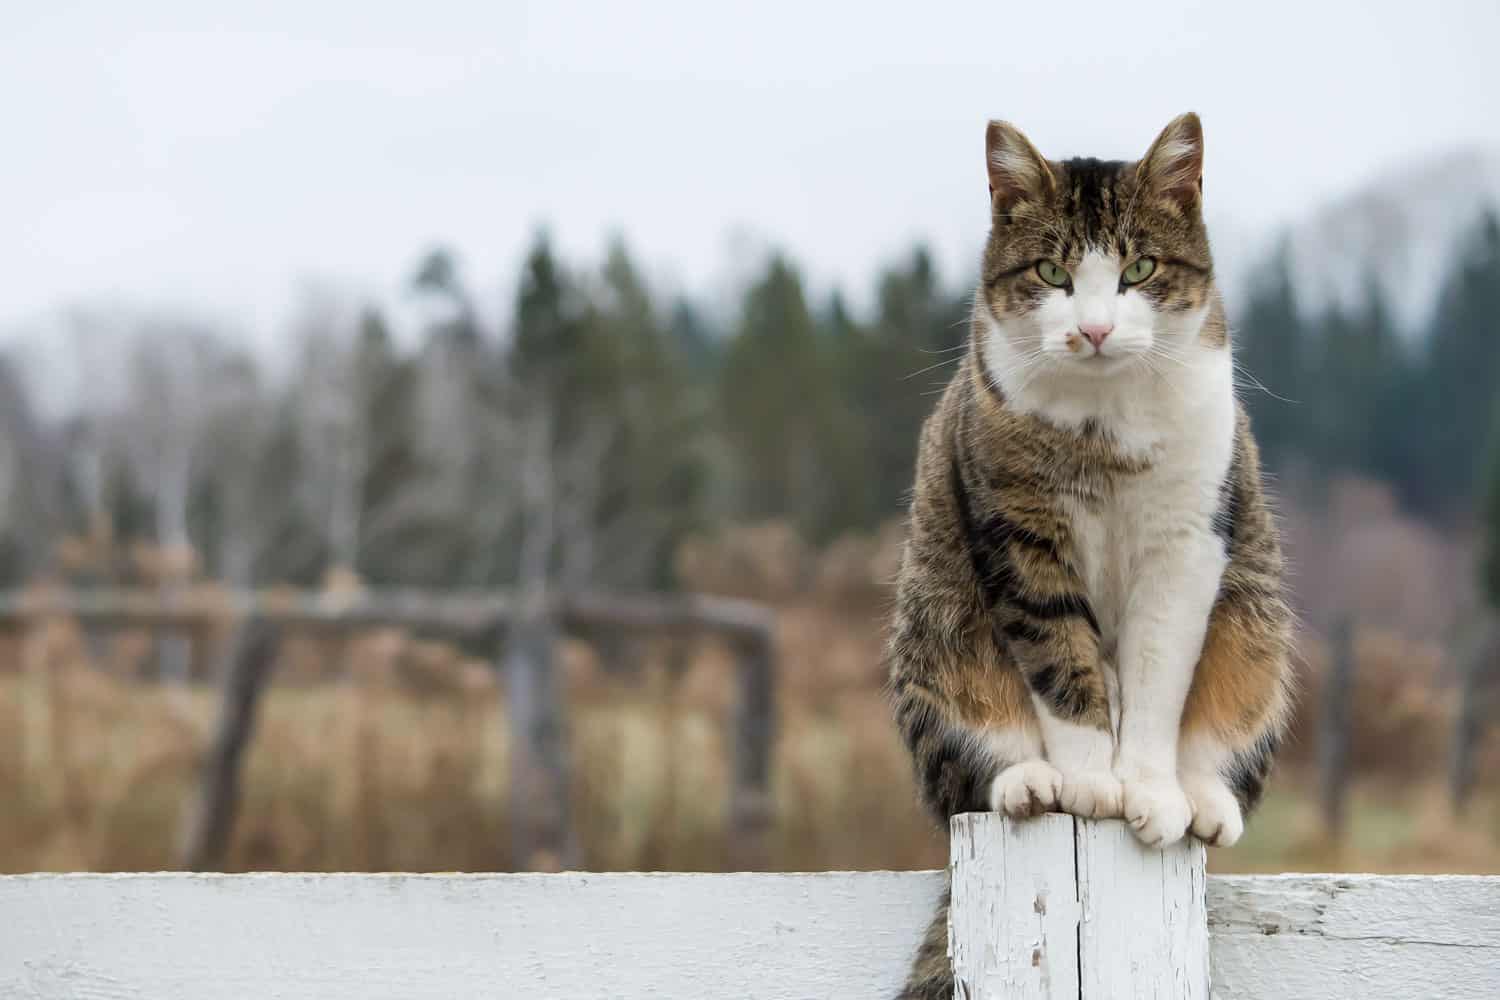 A big barn cat standing on the fence post